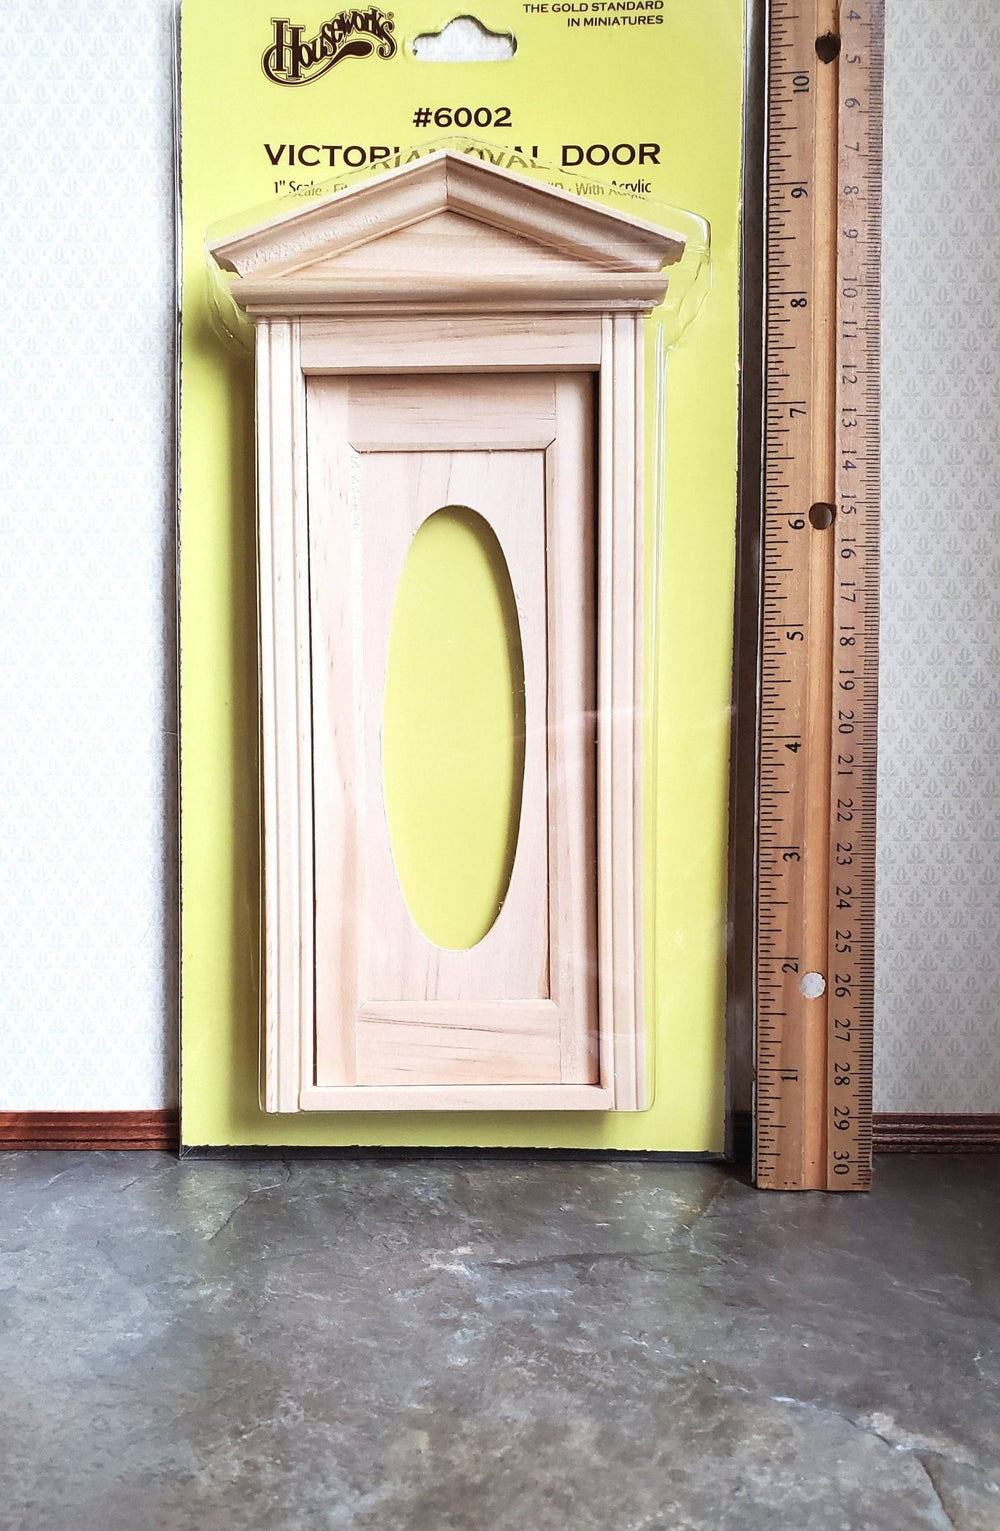 Dollhouse Miniature Exterior Door with Oval Window 1:12 Scale Houseworks 6002 - Miniature Crush